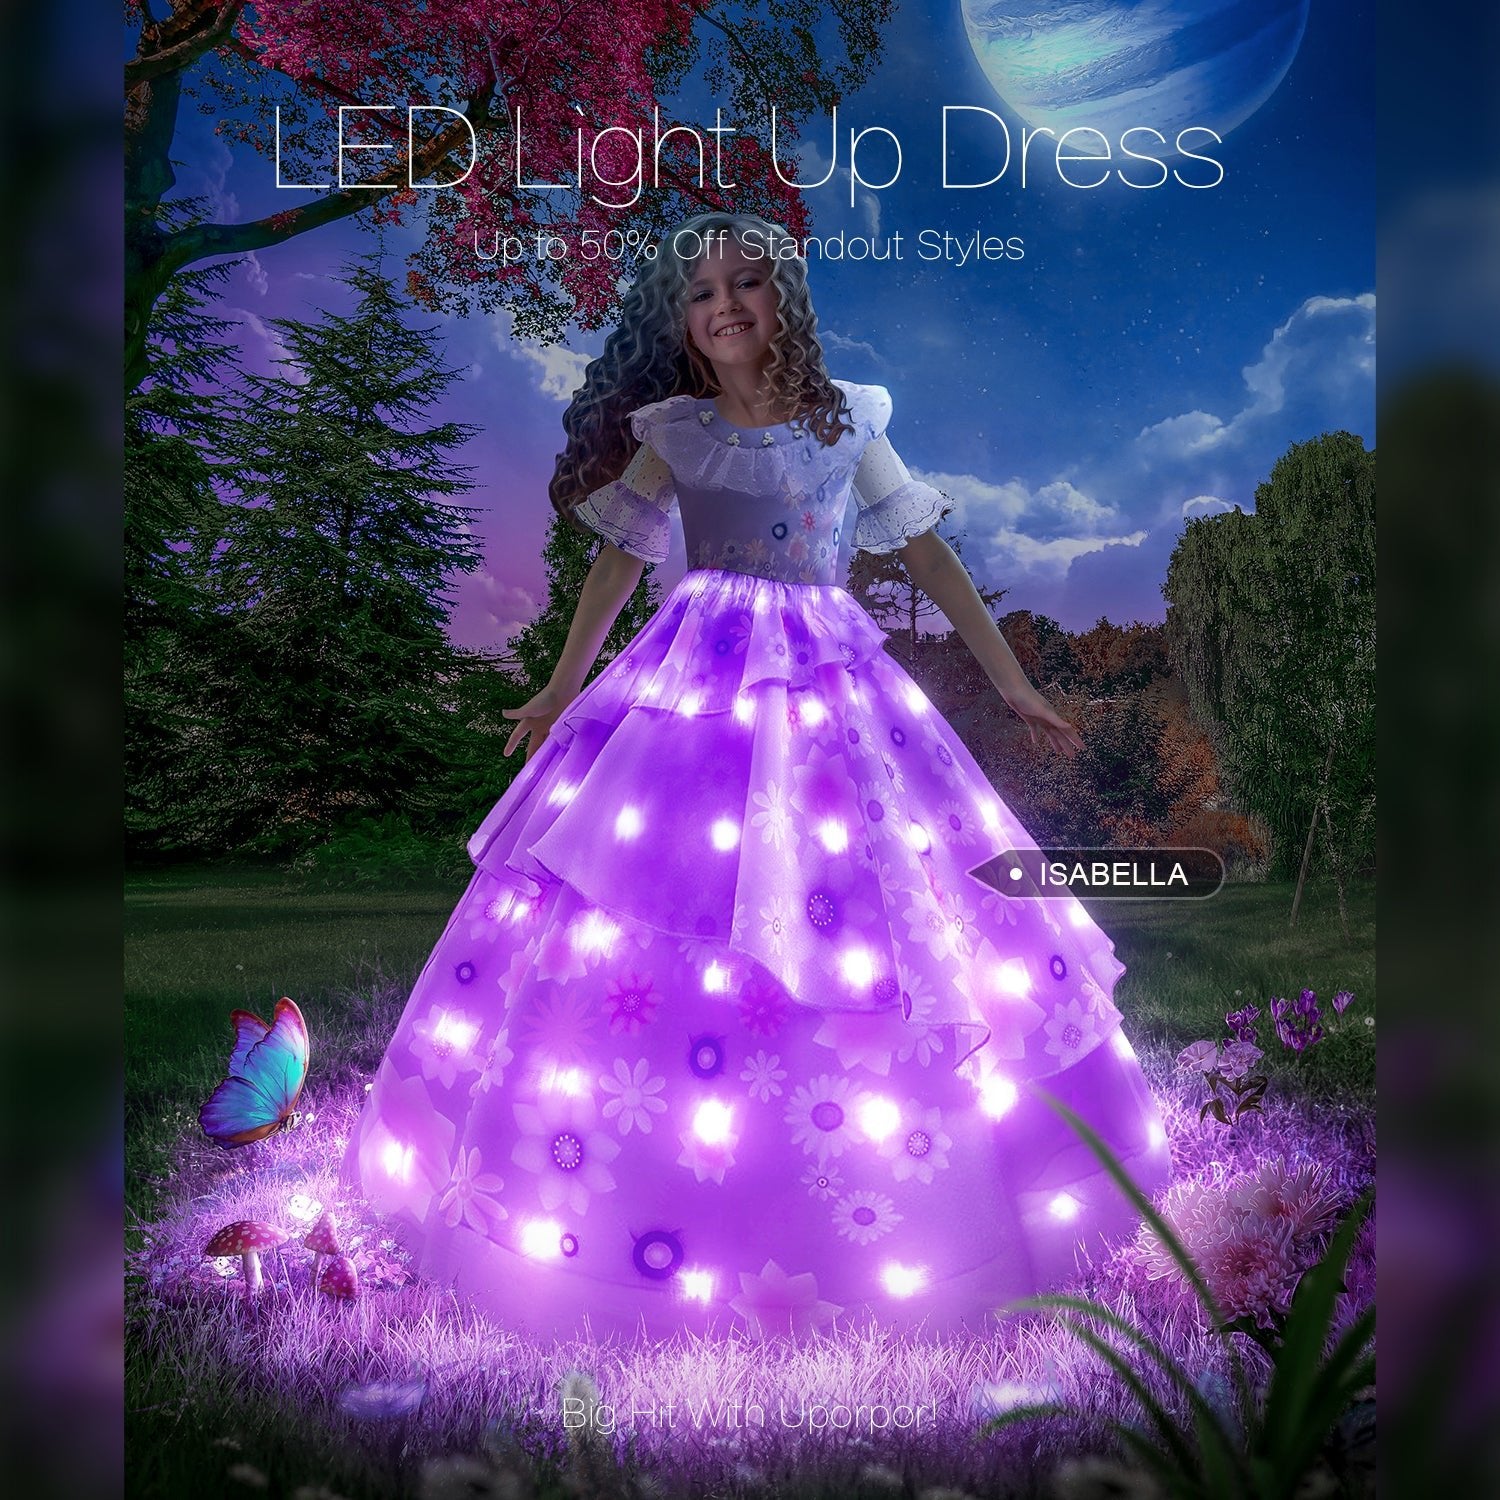 LED lights on dress: the perfect way to make a statement - Uporpor